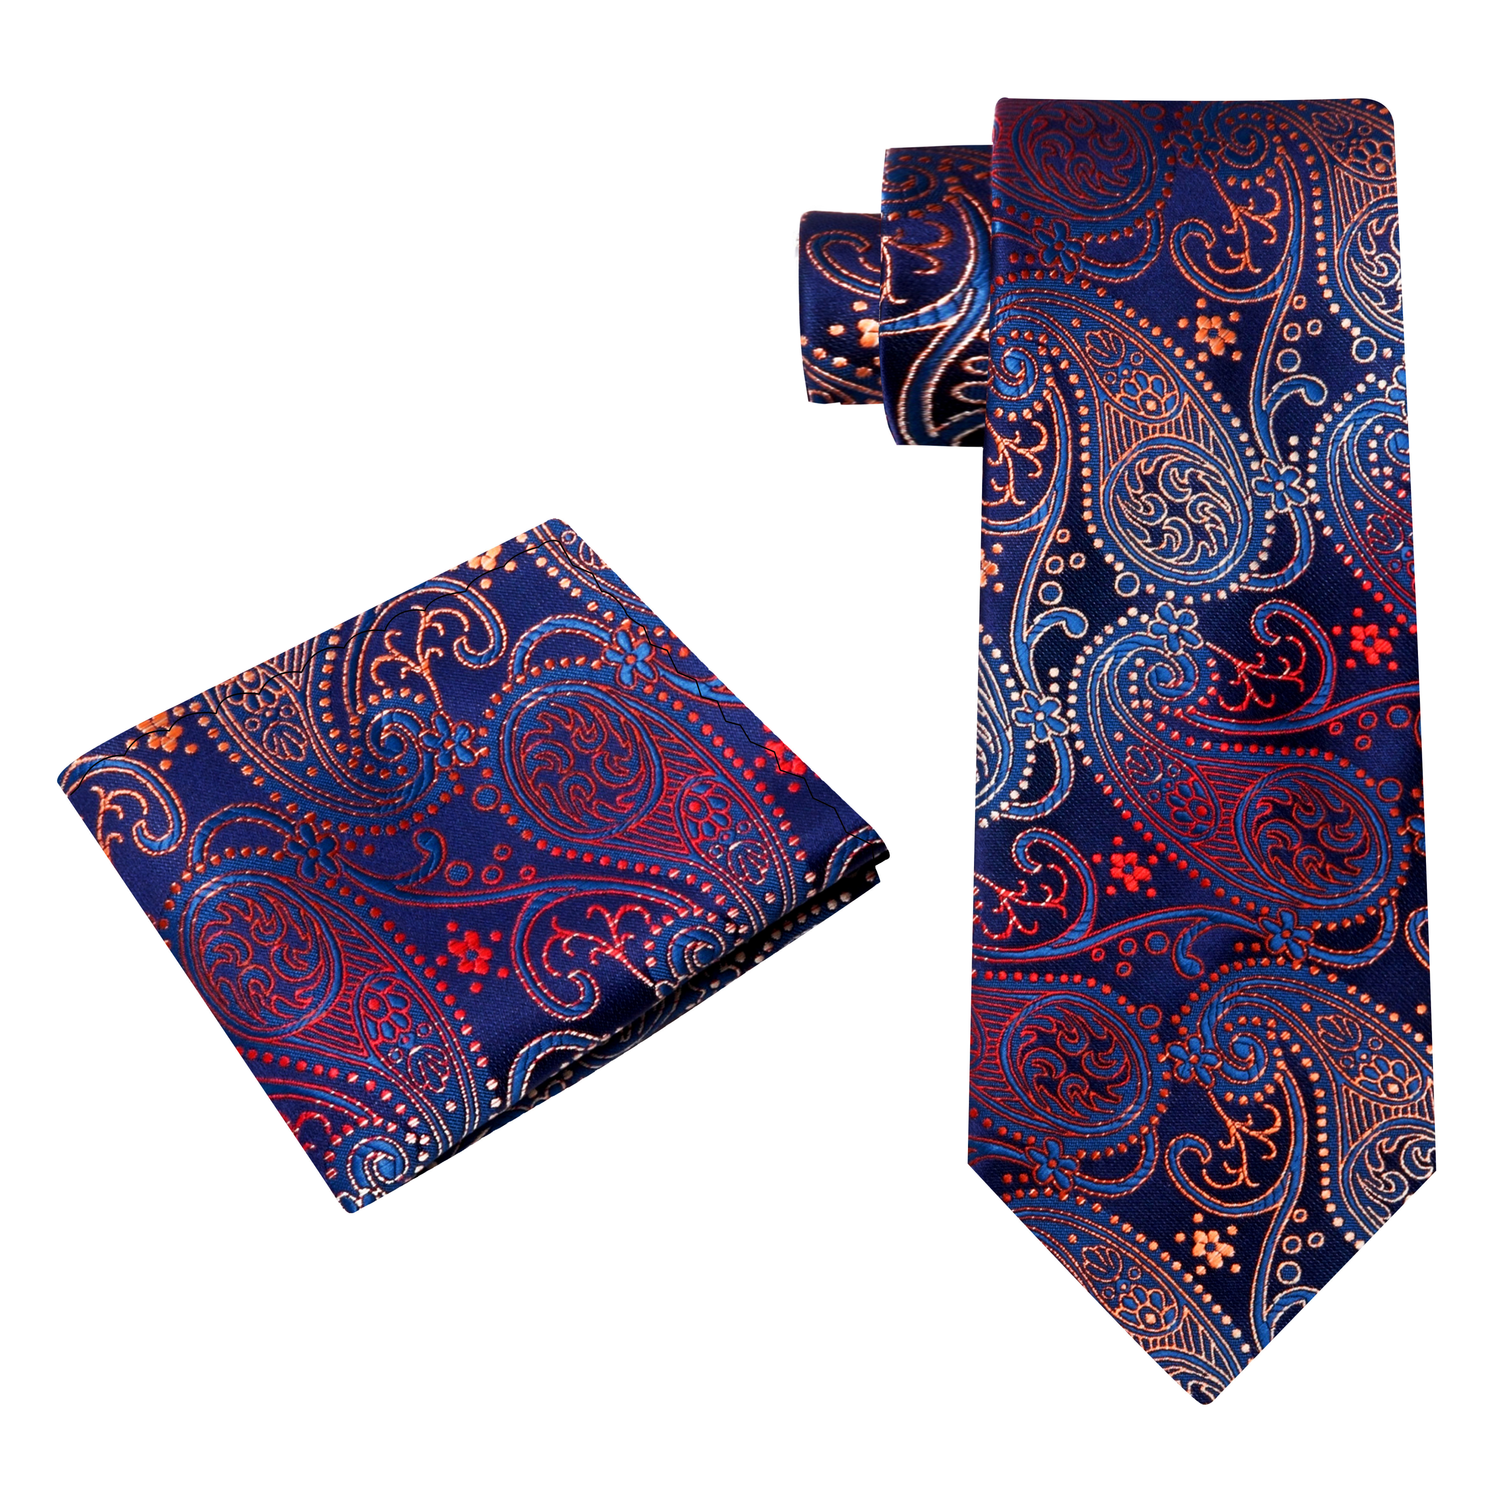 Alt View: Blue Red and Orange Paisley Tie and Pocket Square